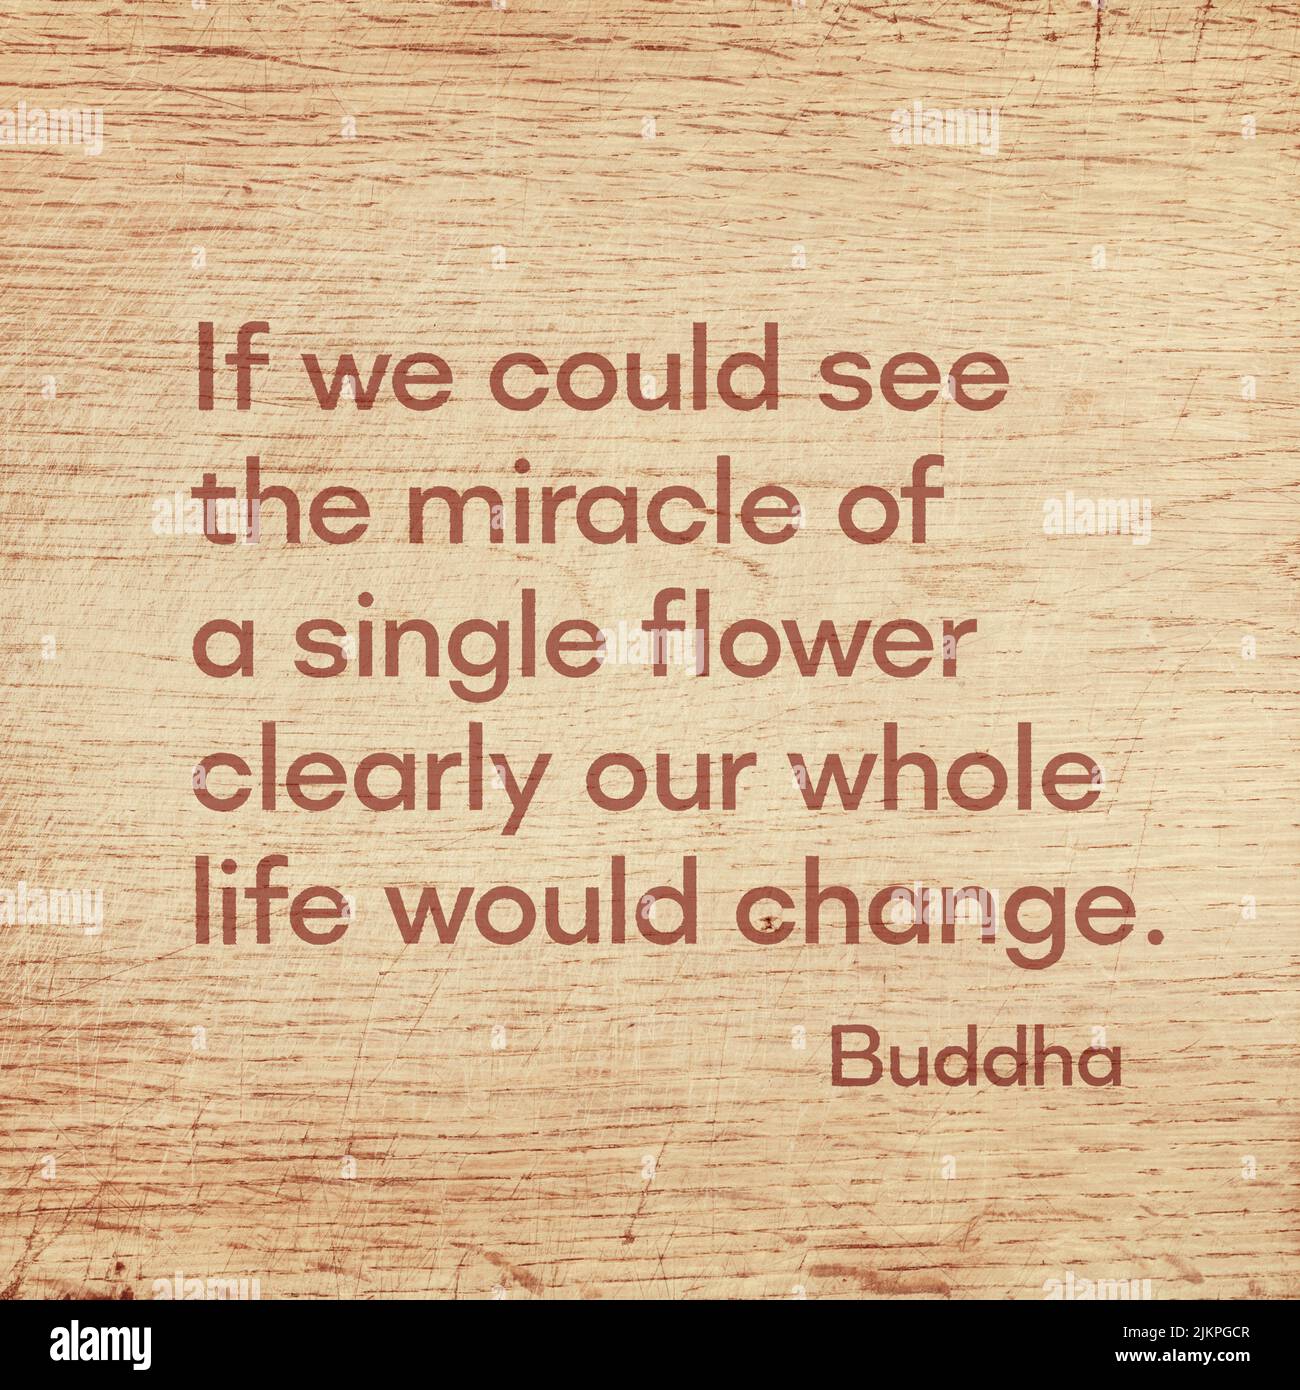 If we could see the miracle of a single flower clearly our whole life would change - famous quote of Gautama Buddha printed on grunge wooden board Stock Photo